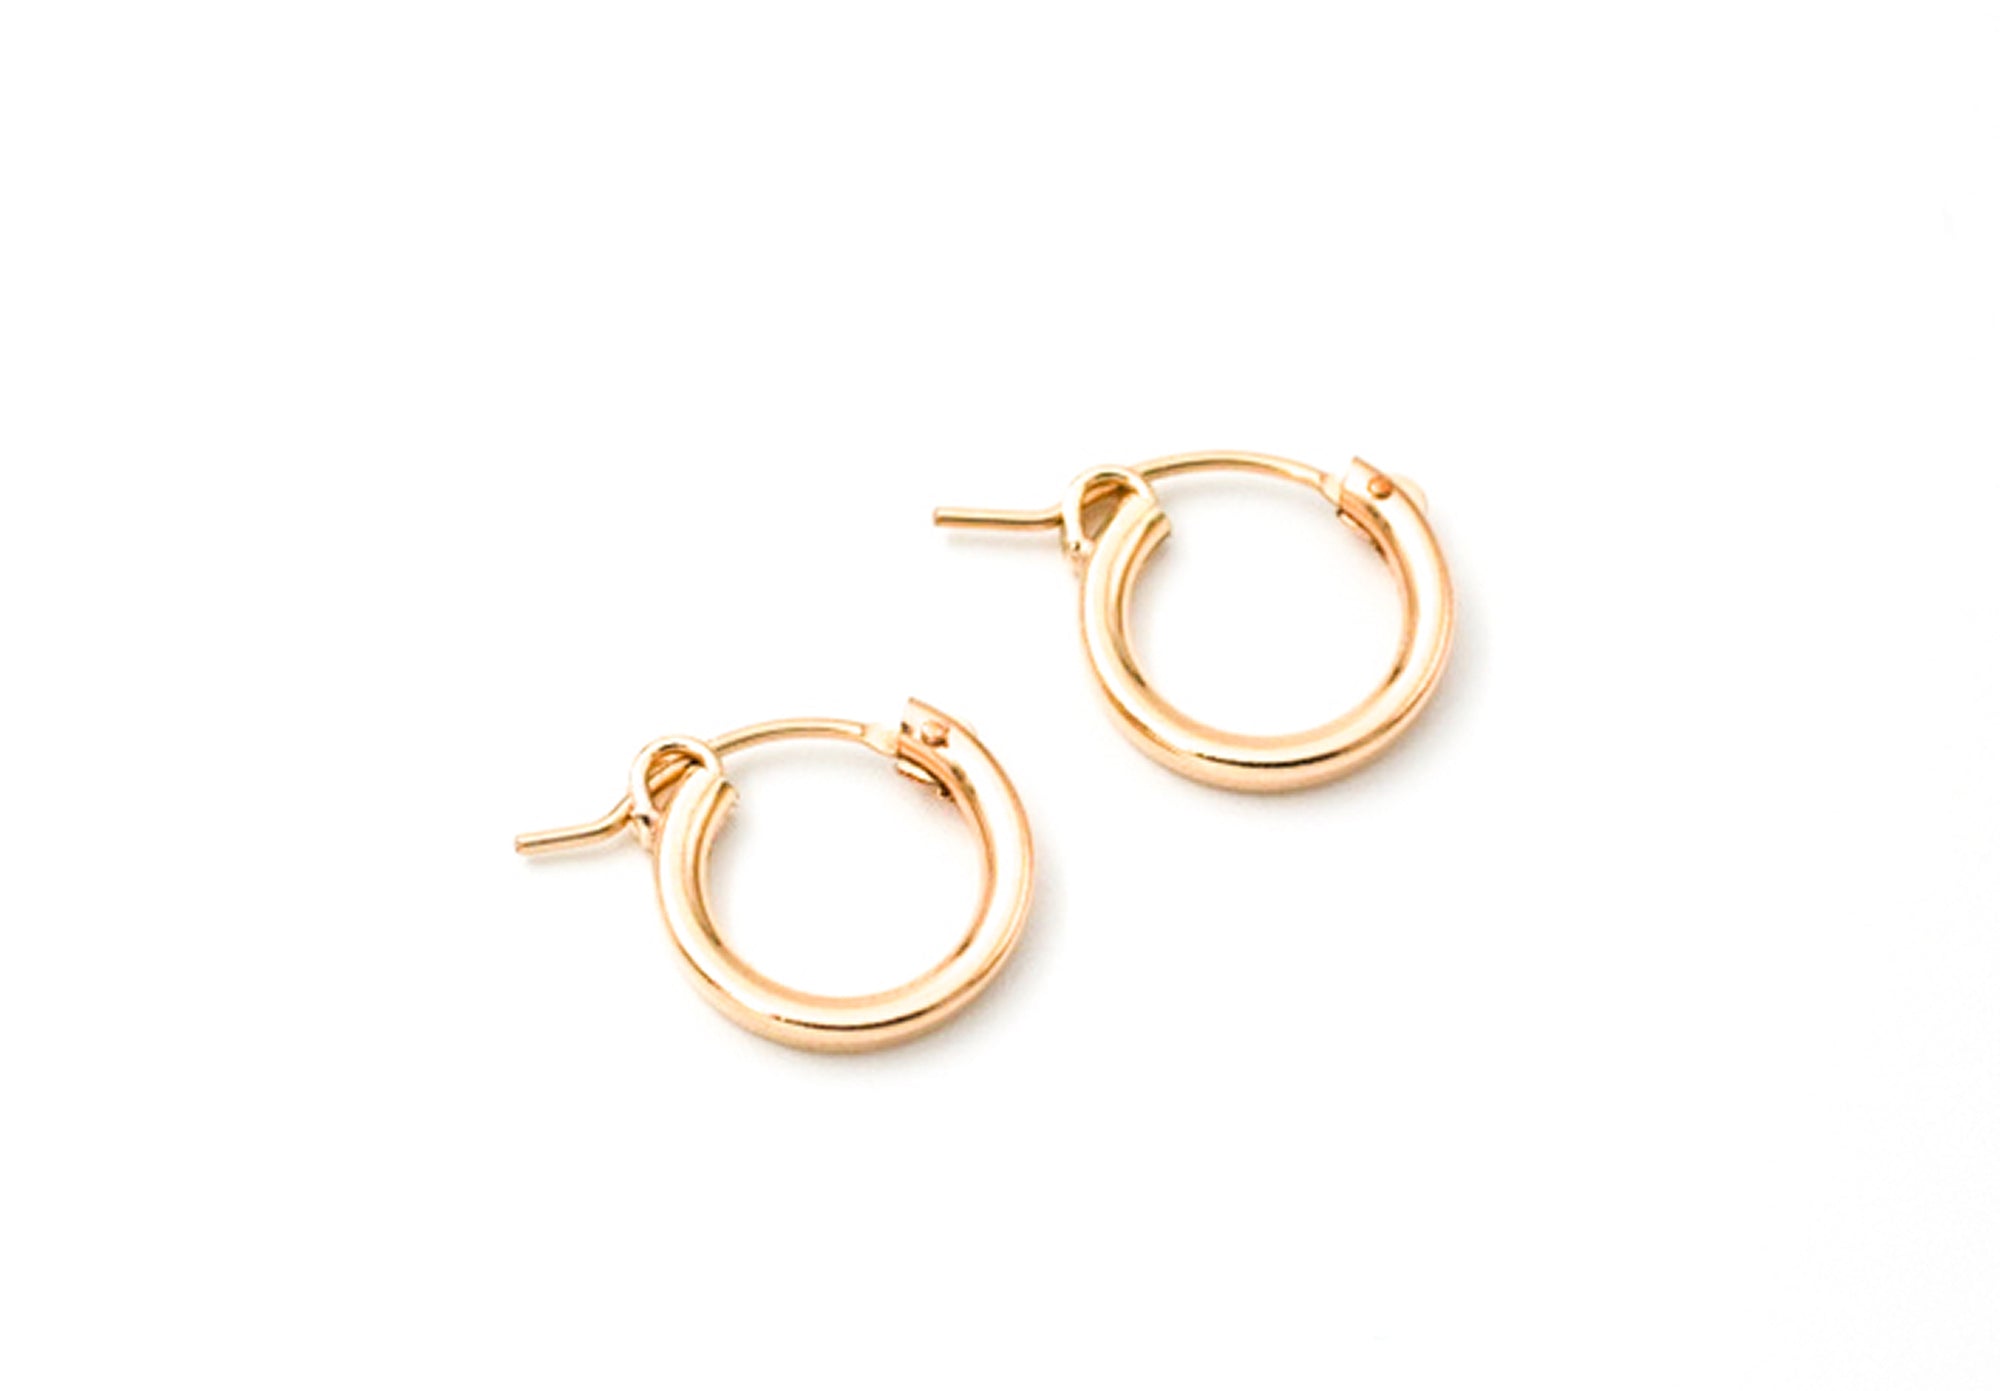 The XS Hinge Hoops by May Martin